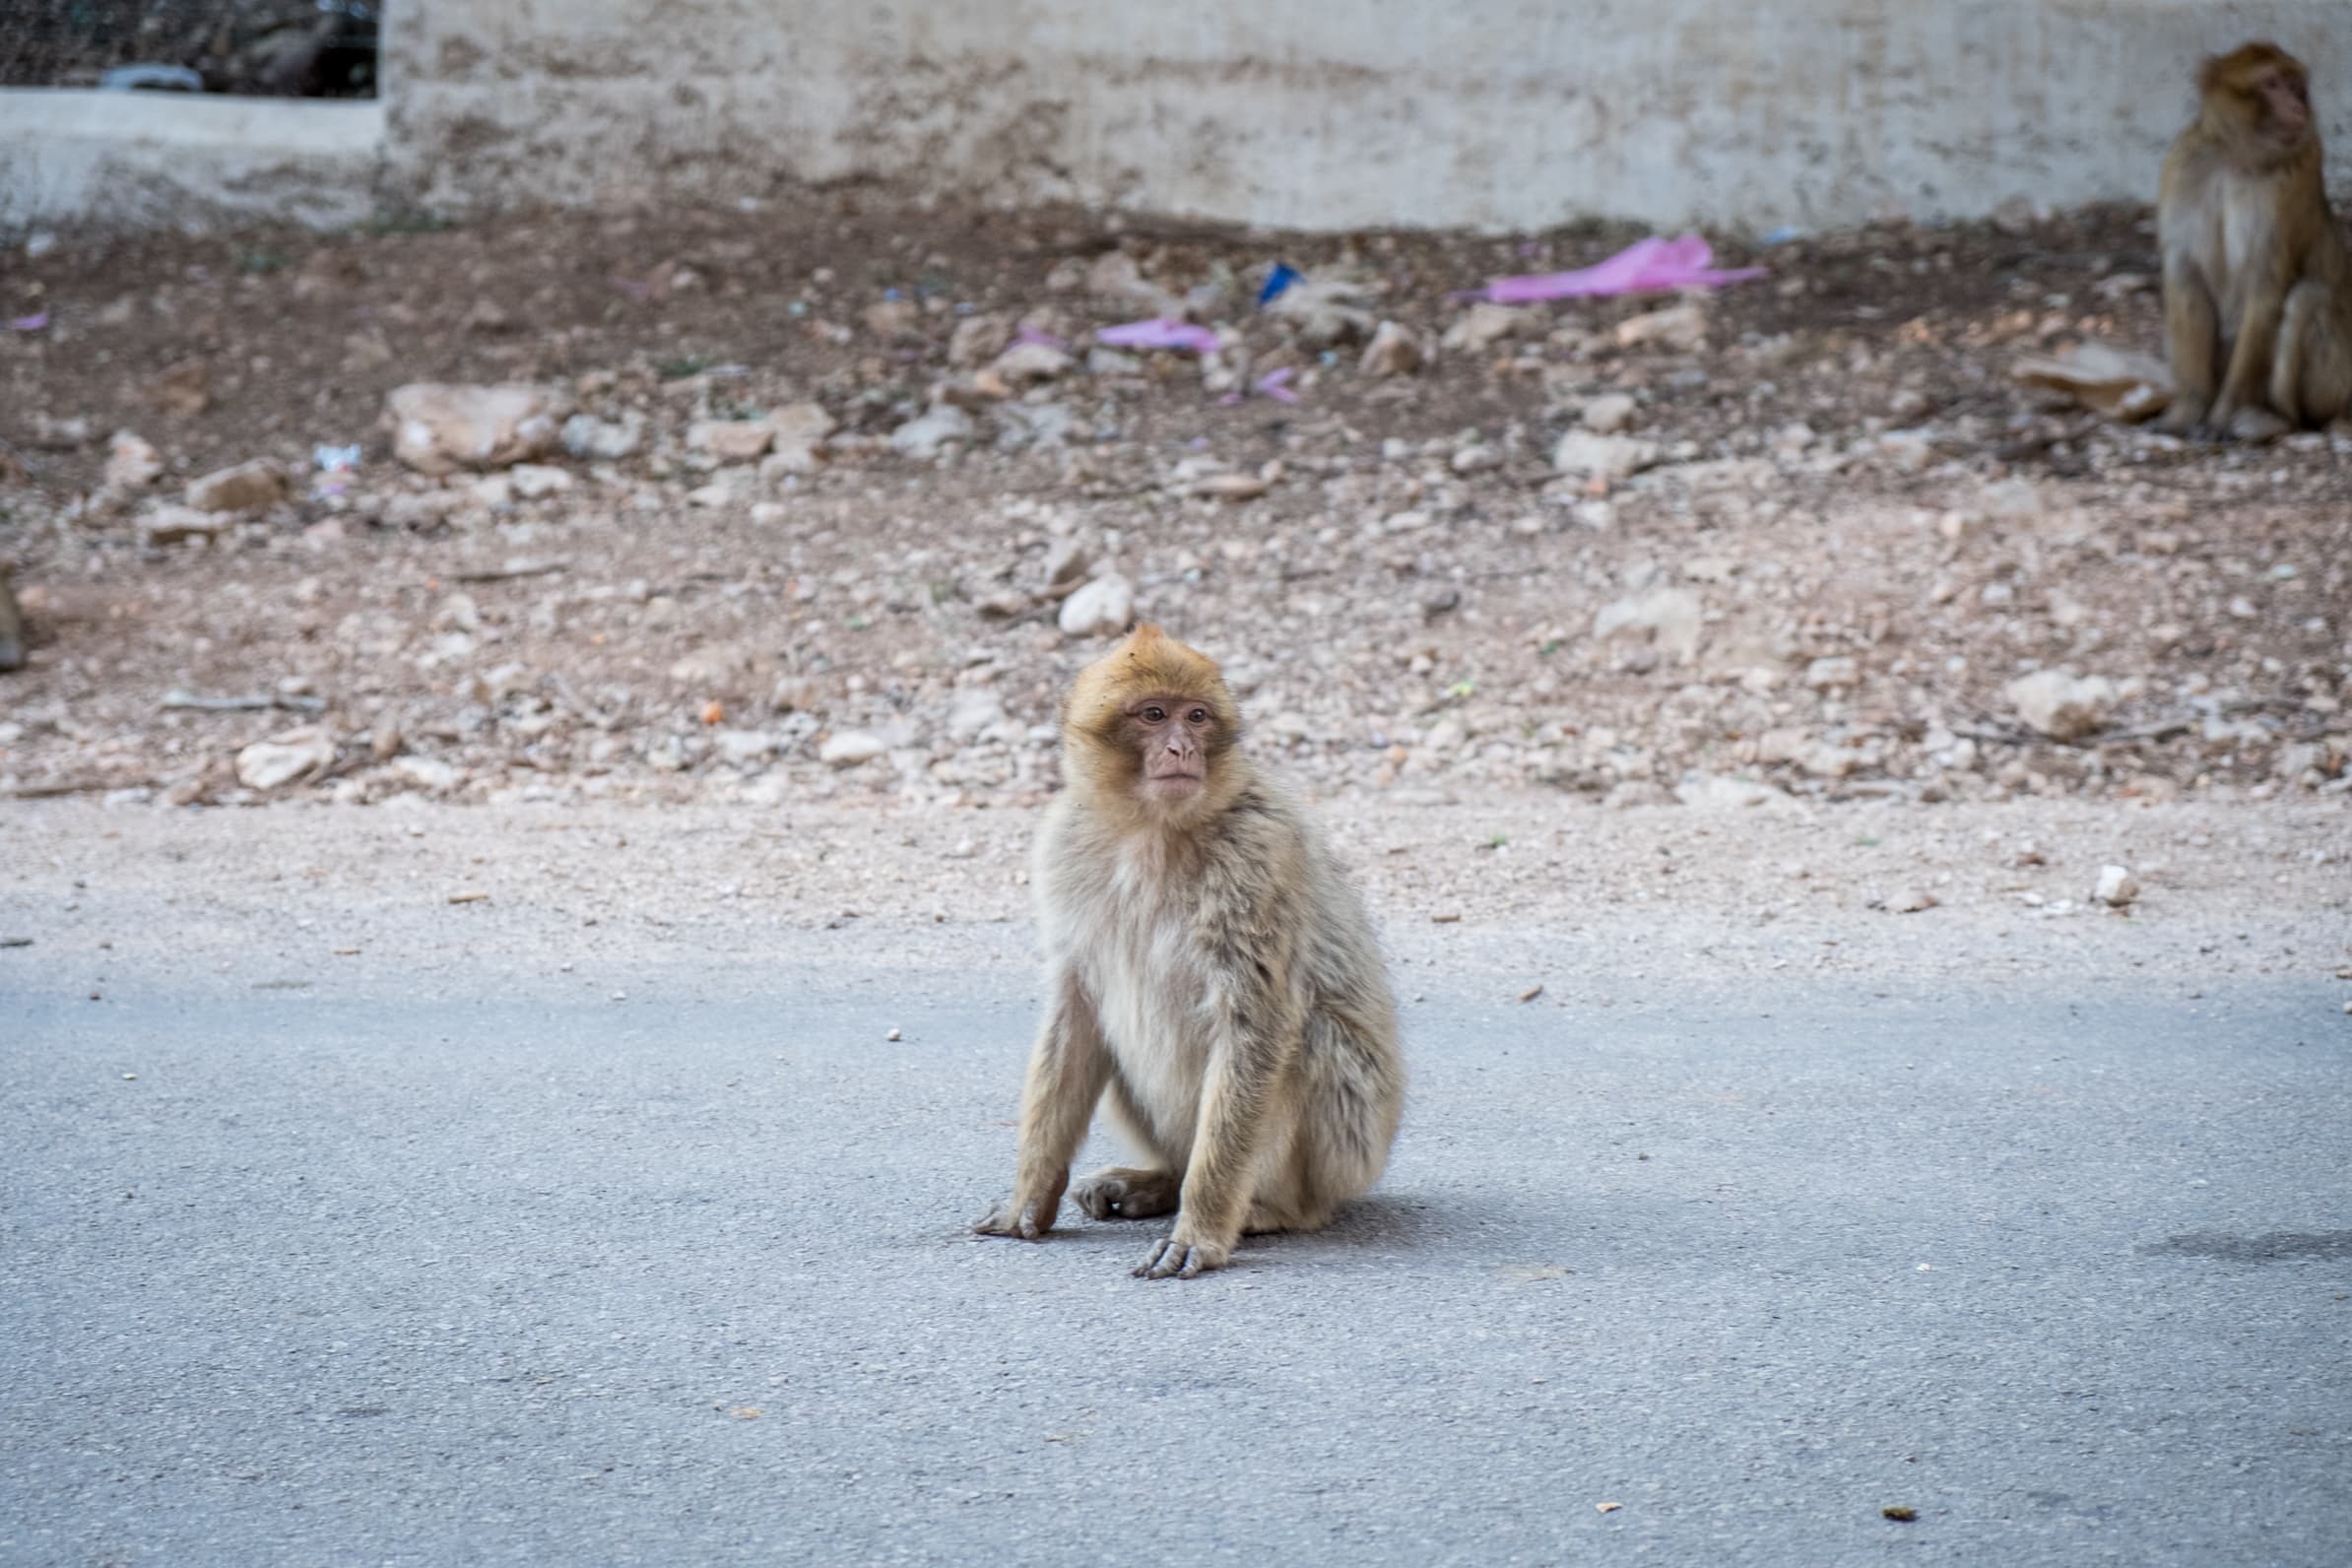 Monkeys on the road in Ifrane, Morocco